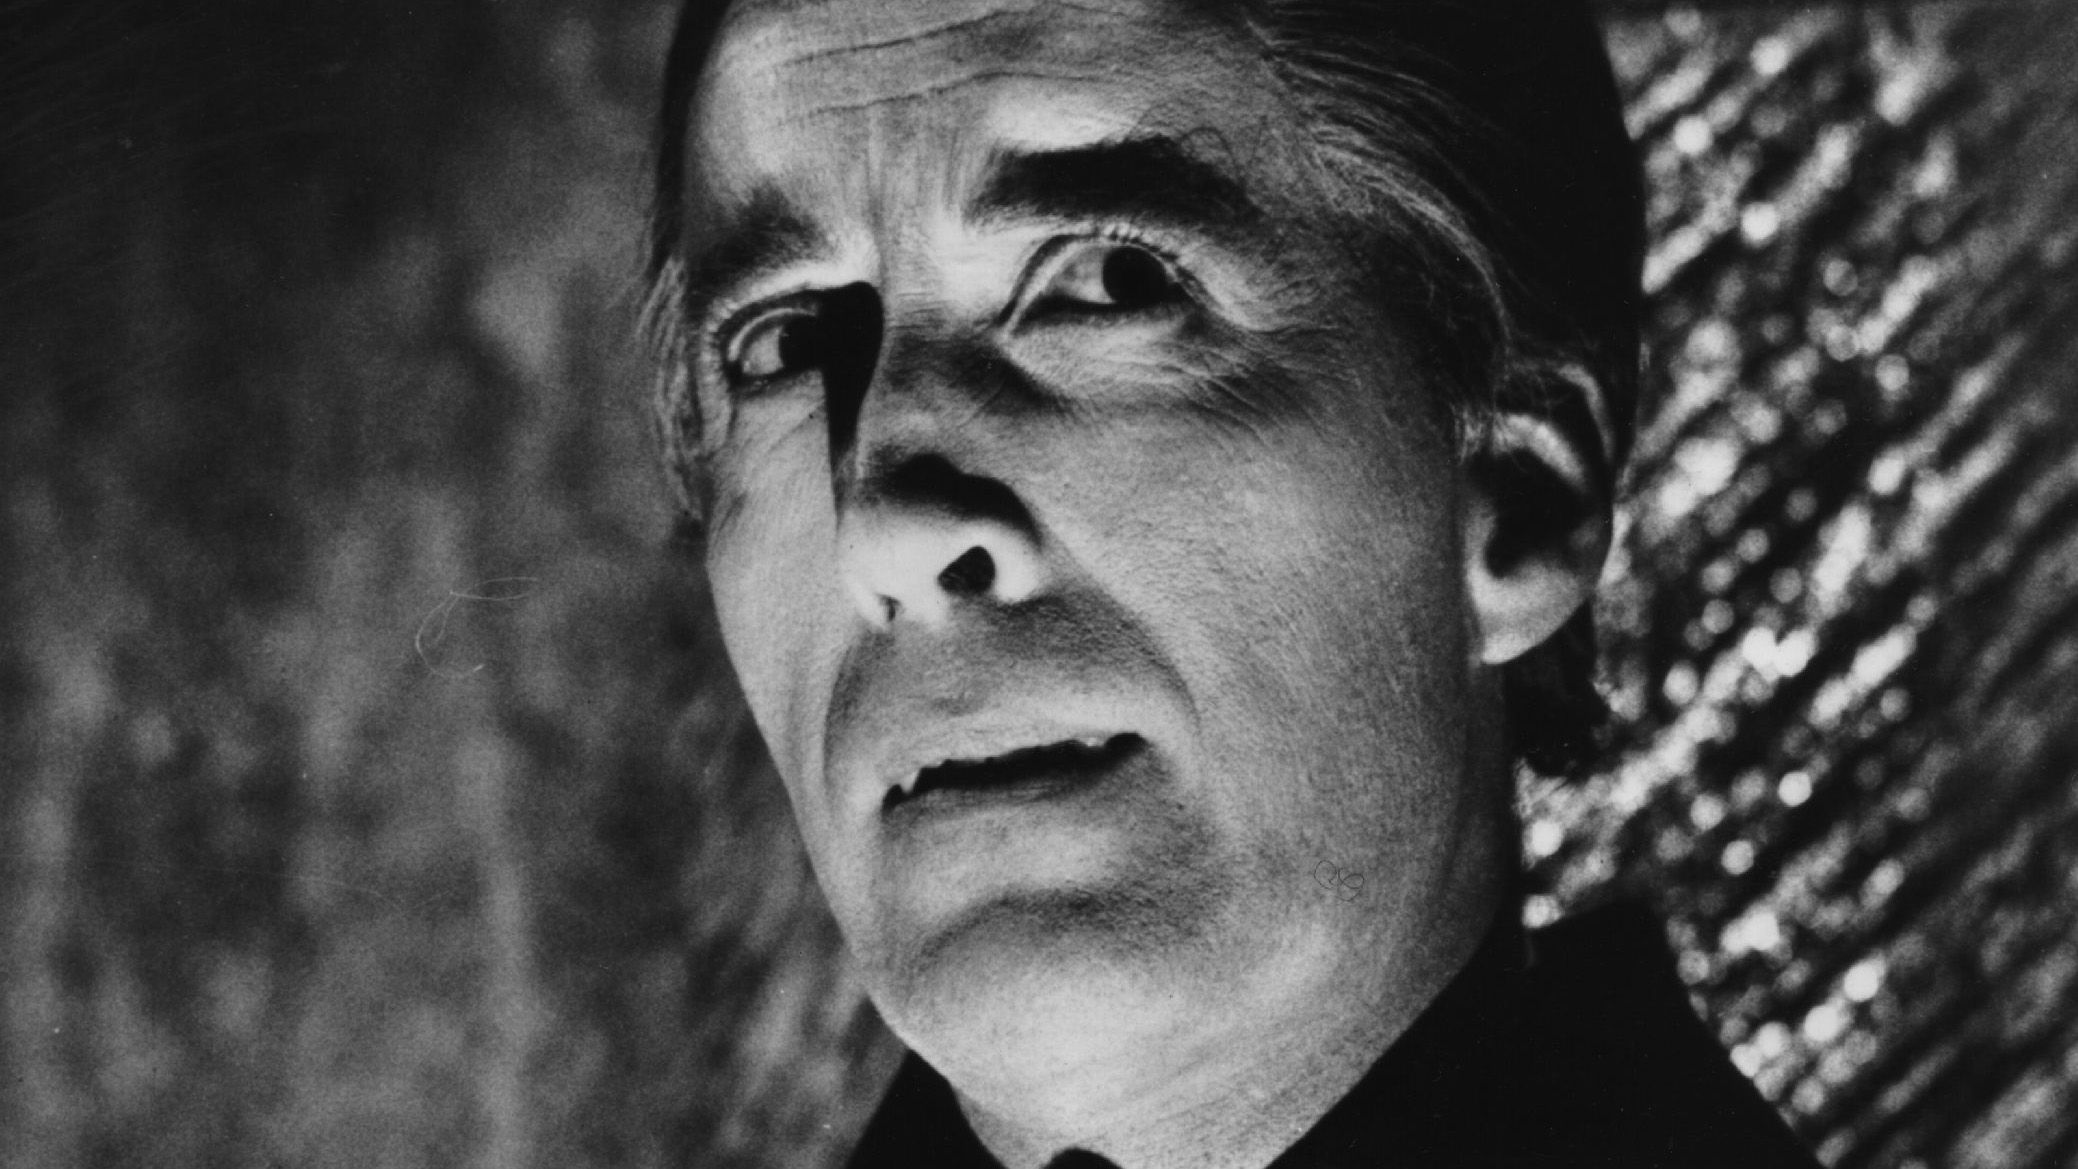 Christopher Lee, Biography, Movies, & Facts